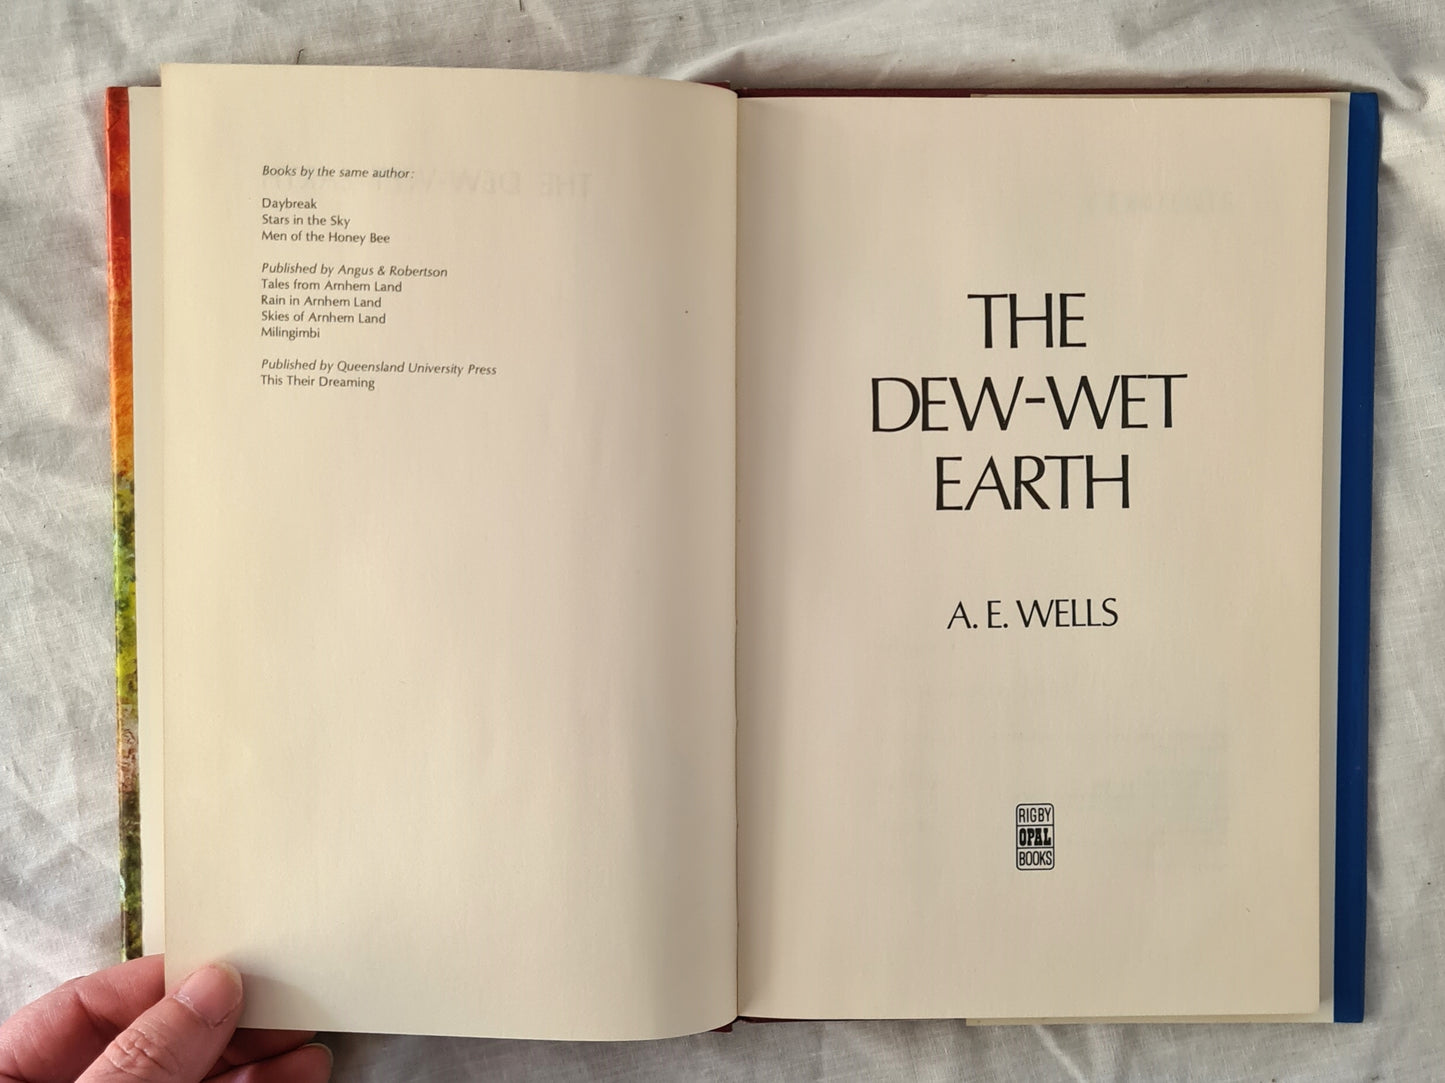 The Dew-Wet Earth by A. E. Wells